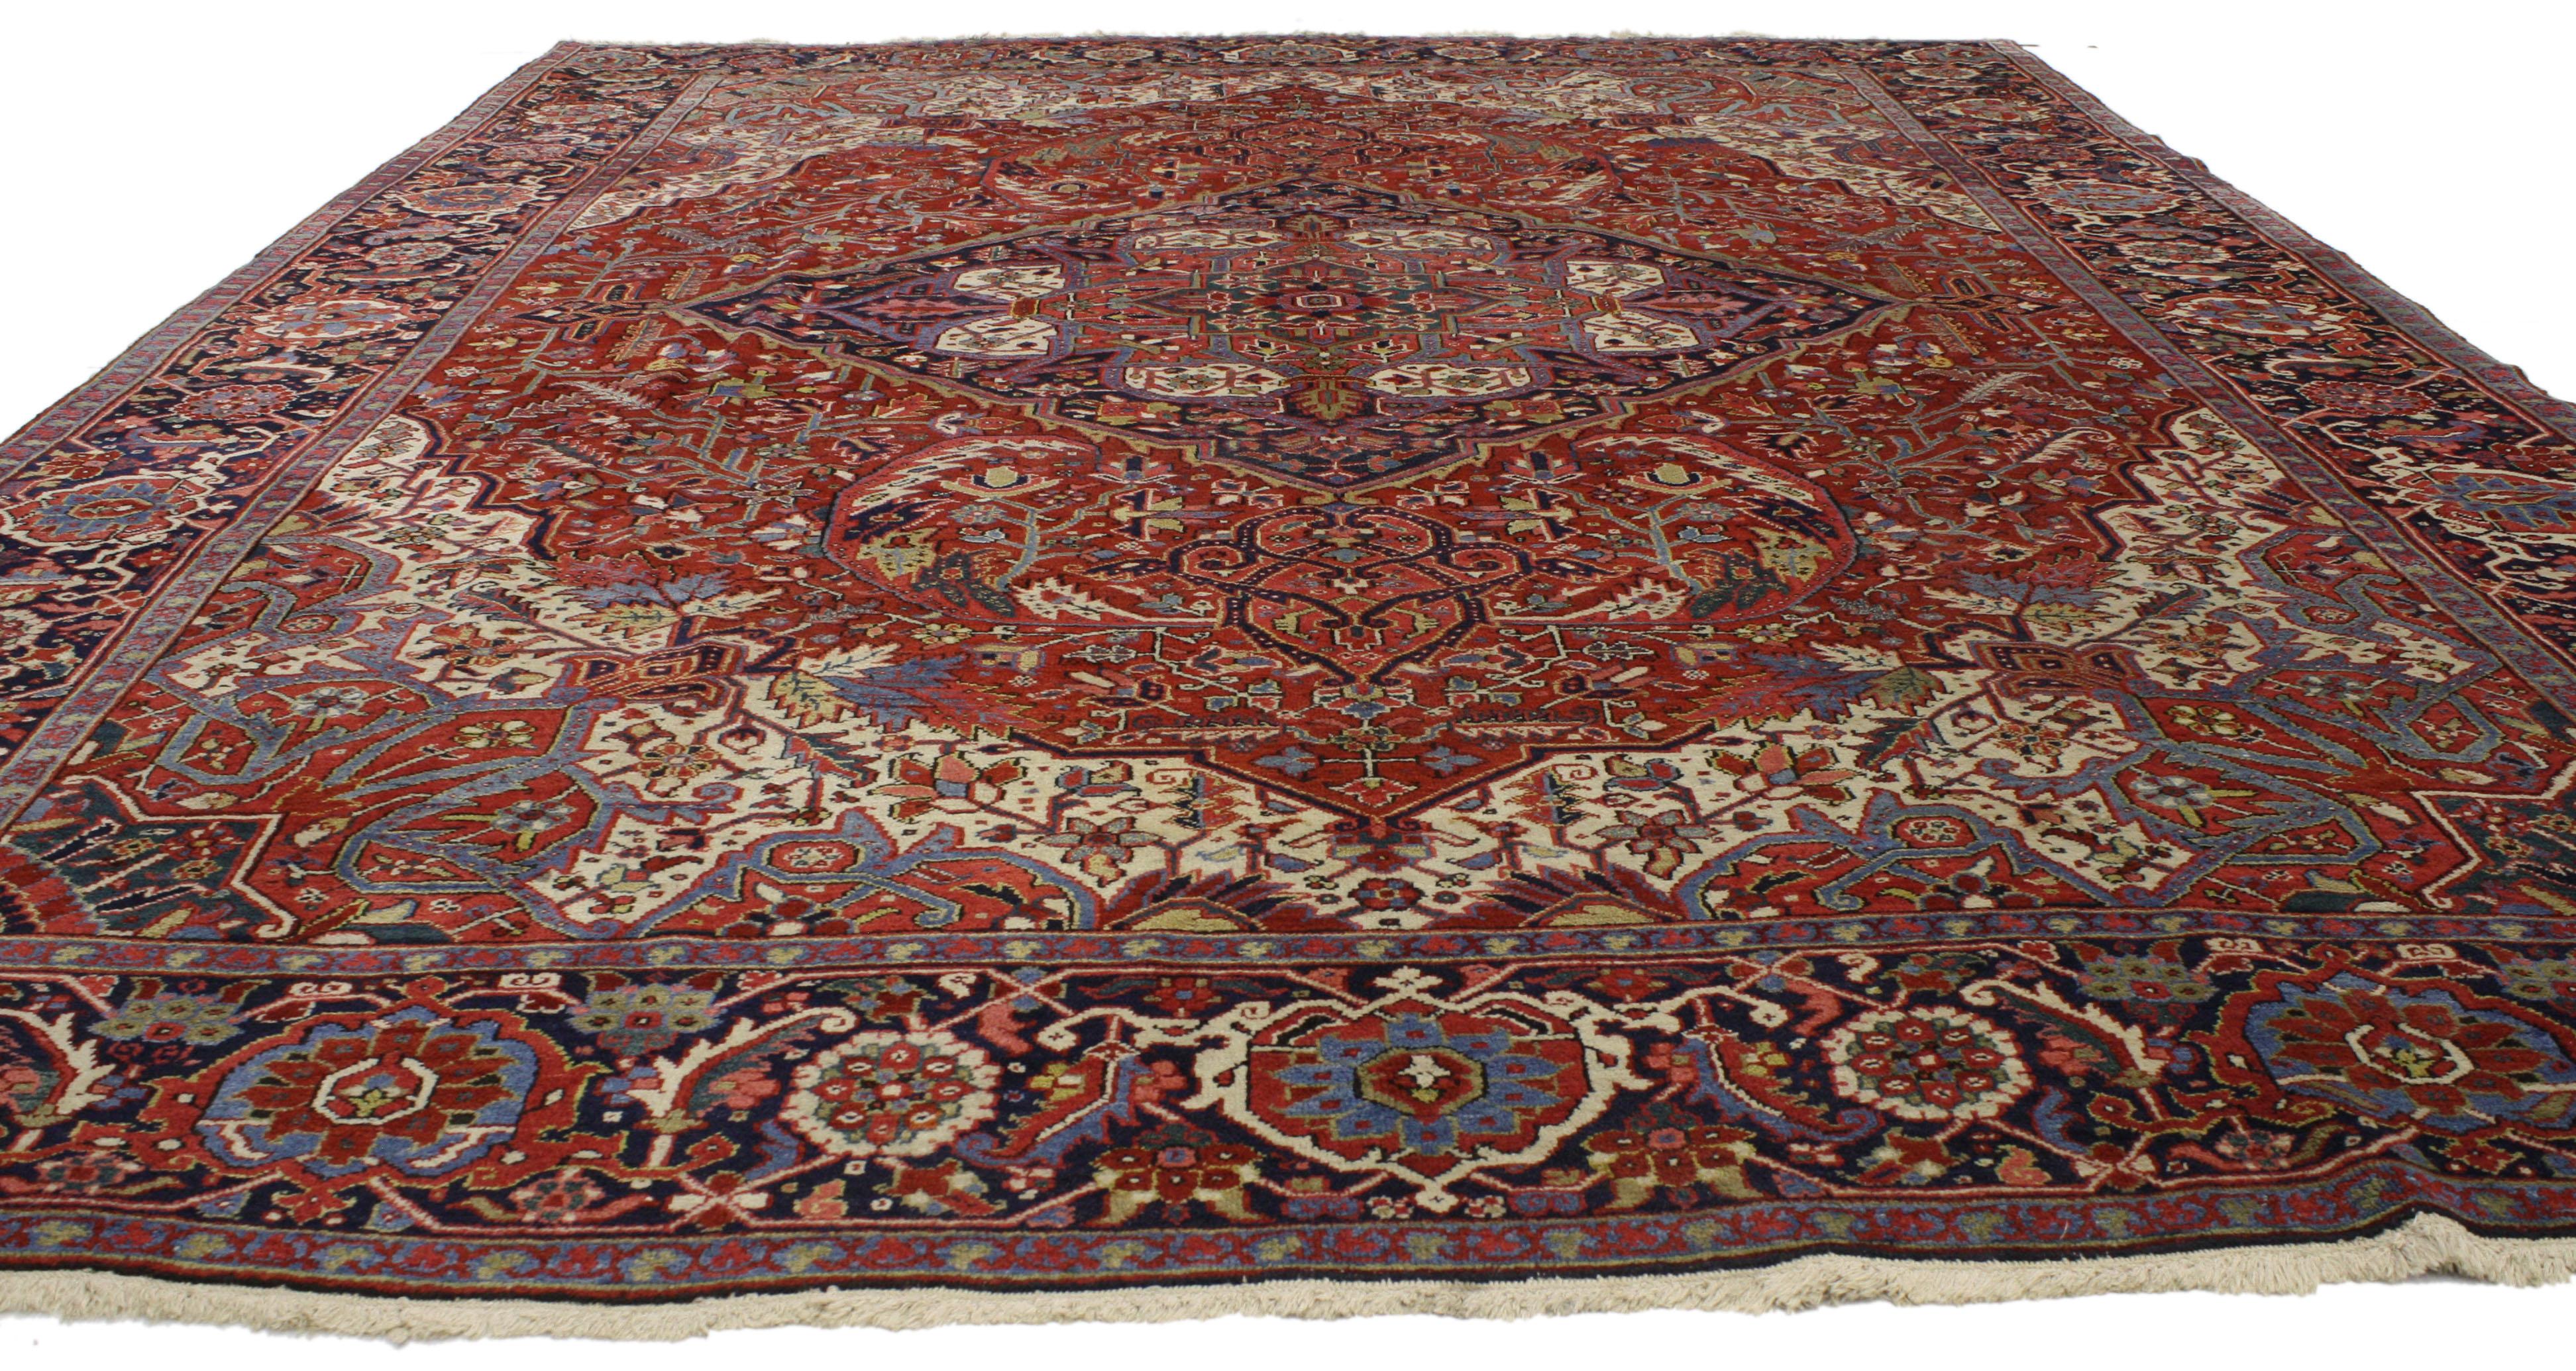 77040, traditional antique Persian Heriz rug with English country style manor house. Traditional and regal with brilliant color, this antique Persian Heriz Area rug features a cusped octofoil medallion set with multiple lobed medallions within an